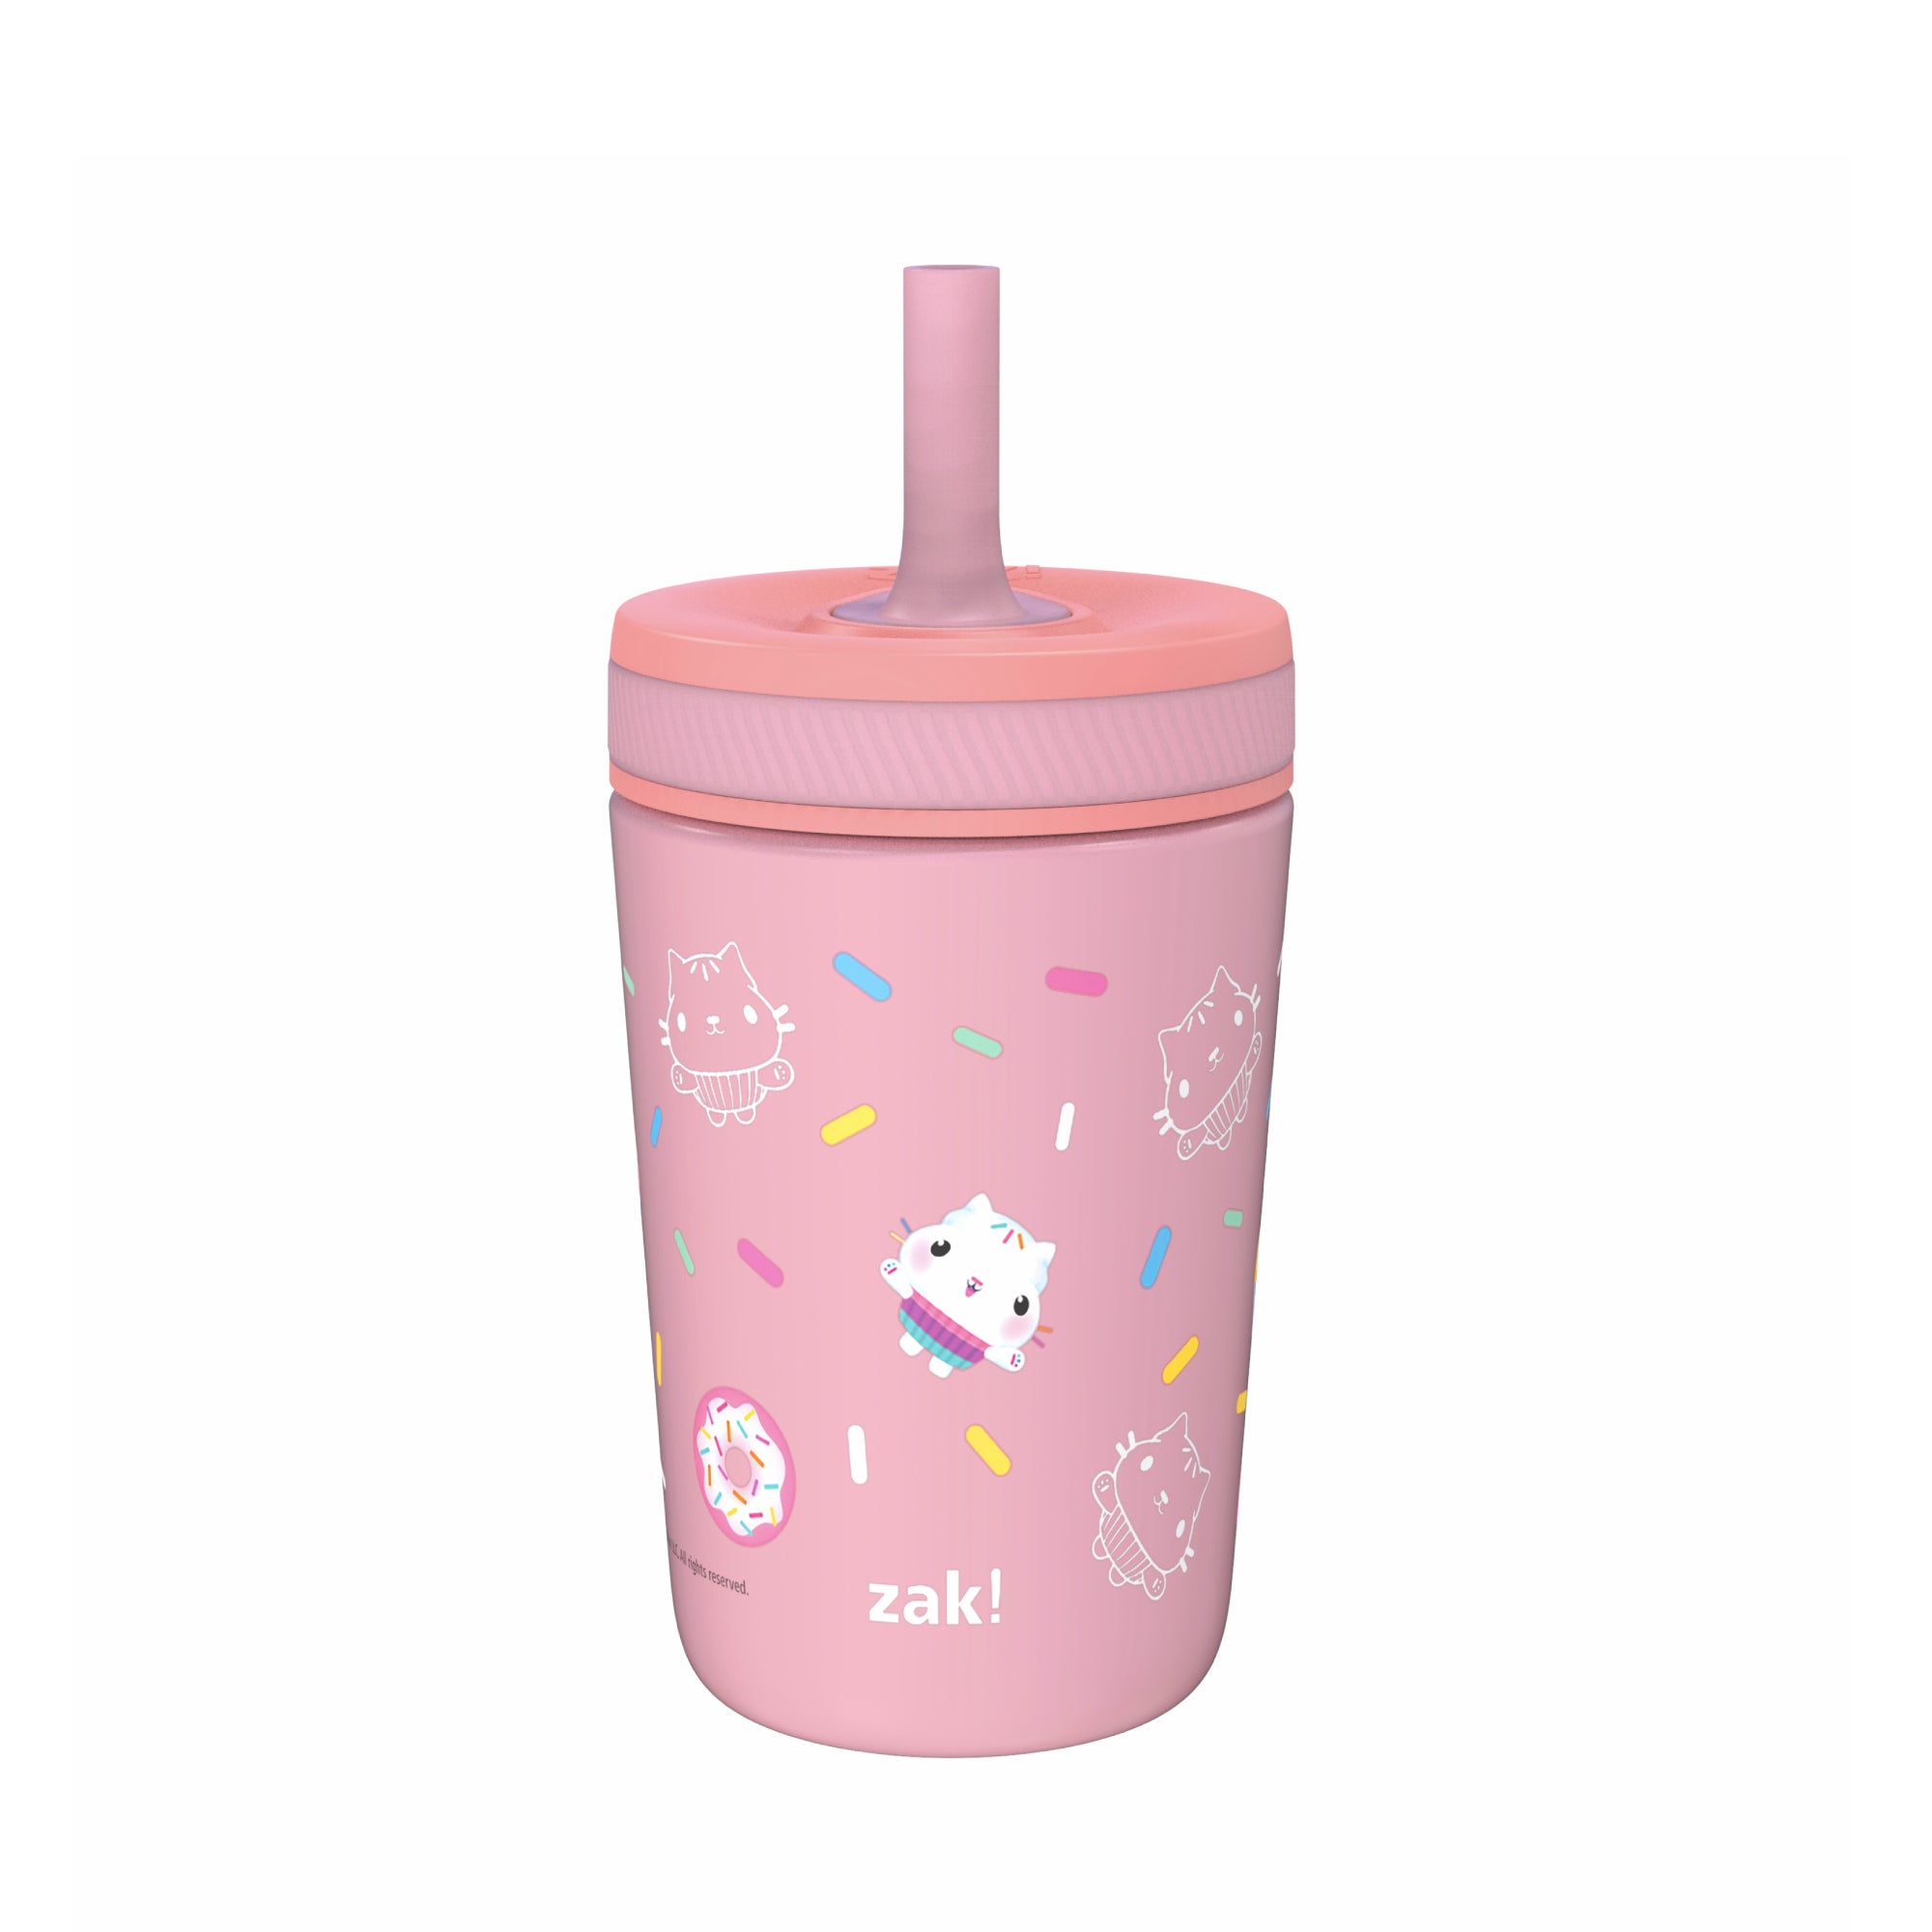 Kelso Kids Insulated Straw Tumbler - Gabby's Dollhouse, 12 Ounces